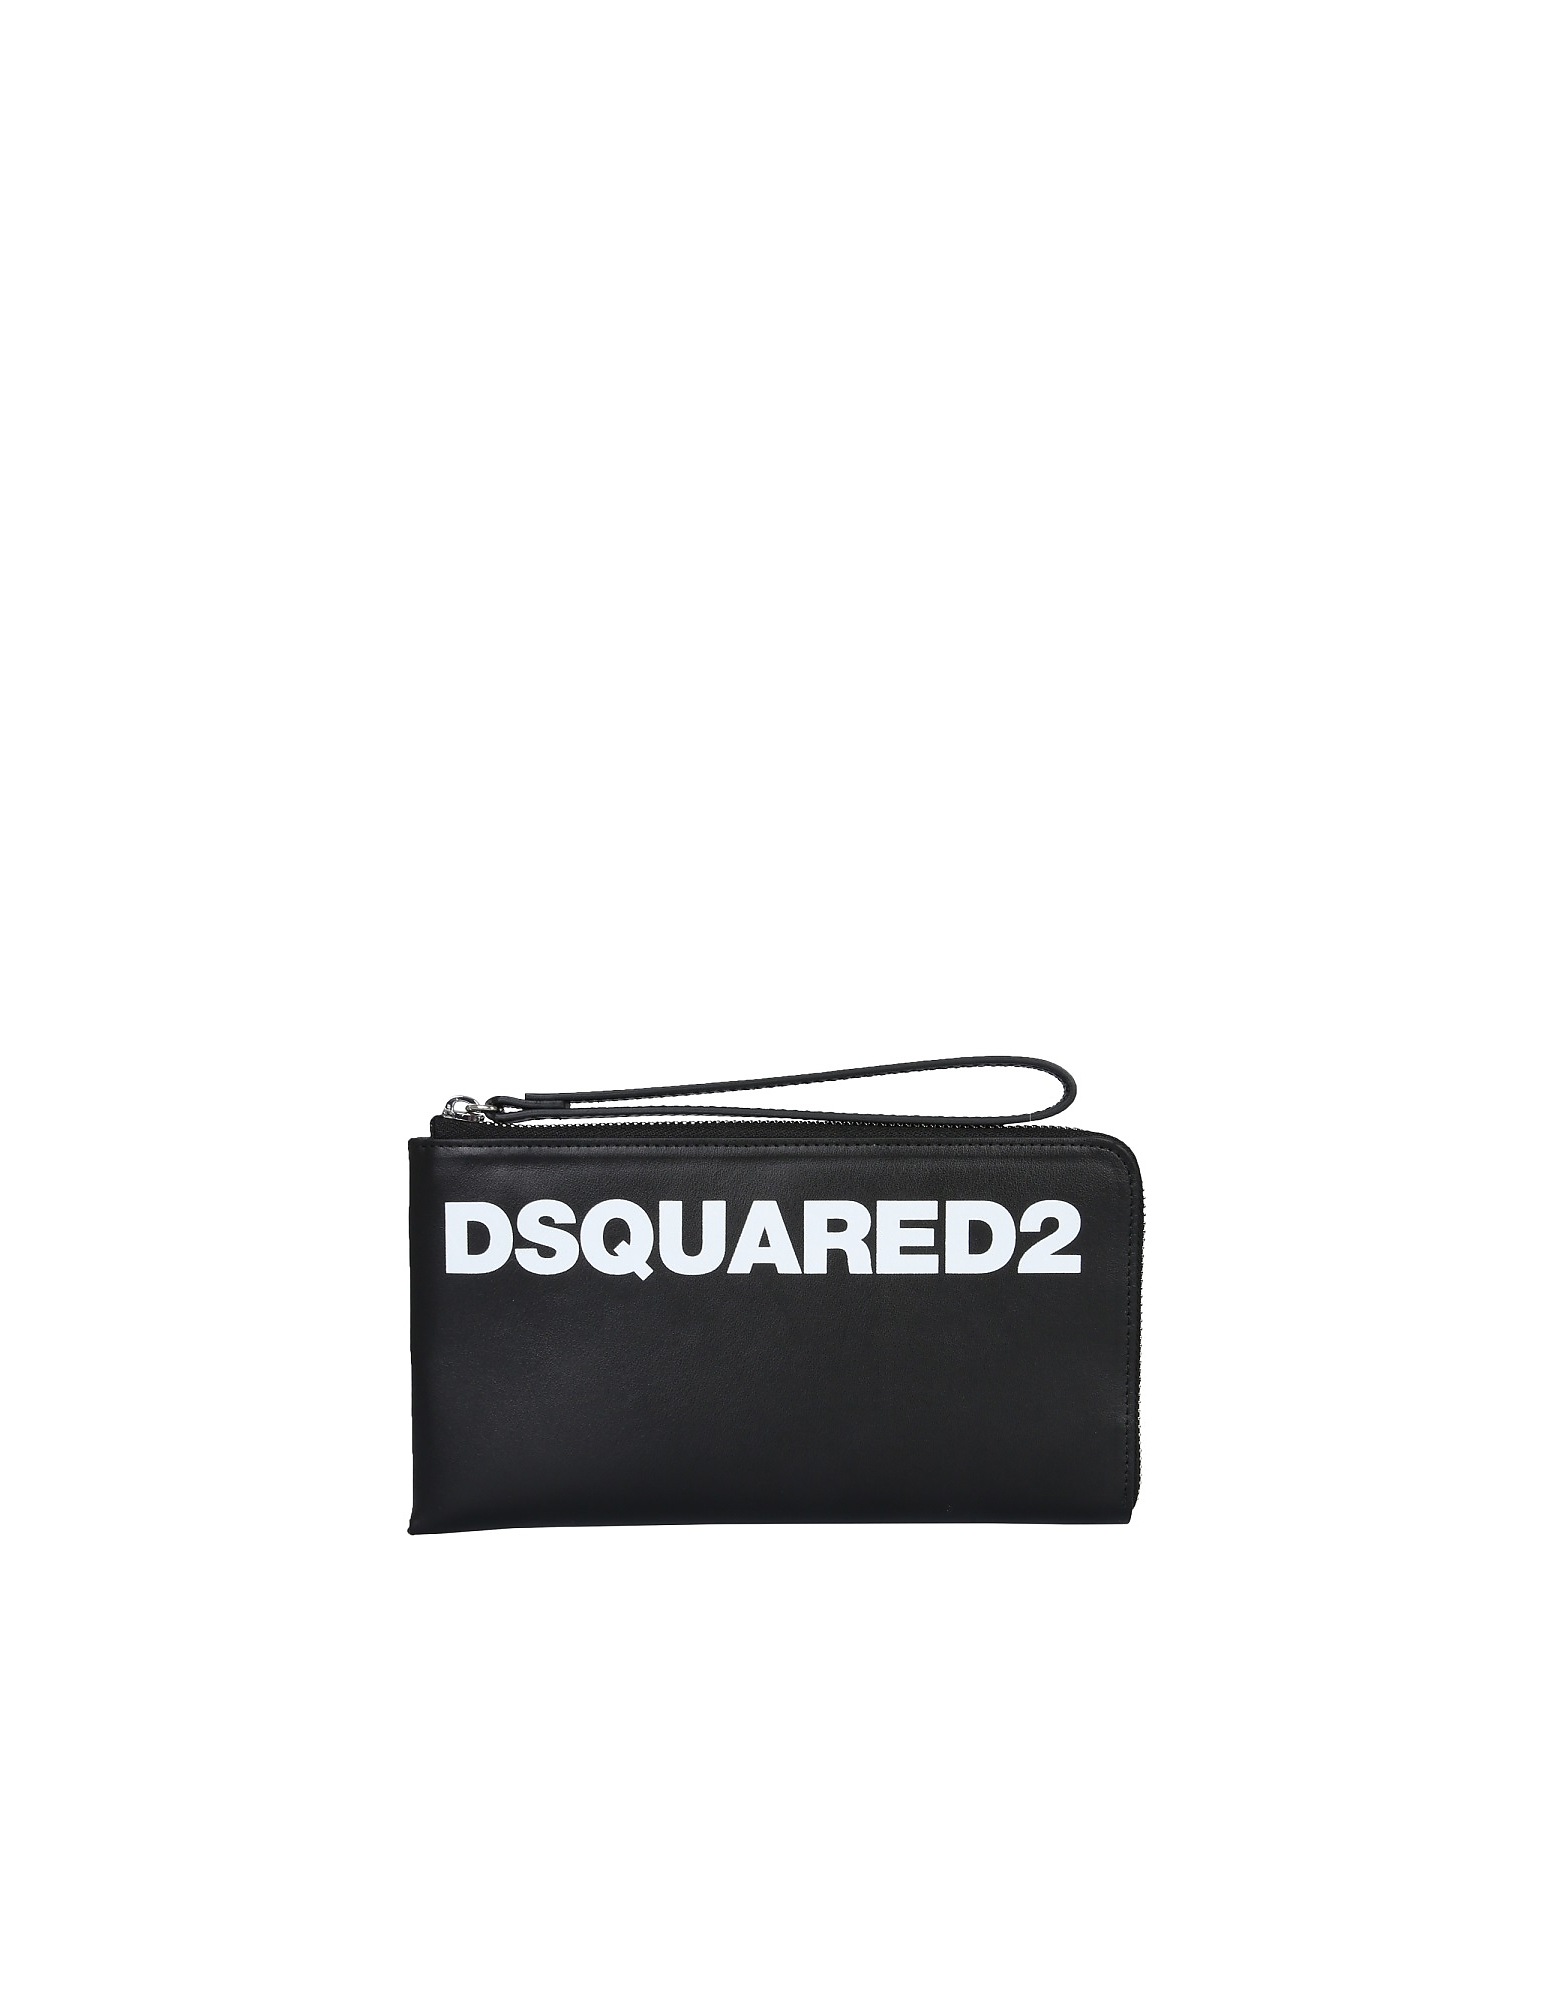 Dsquared2 CLUTCH WITH LOGO